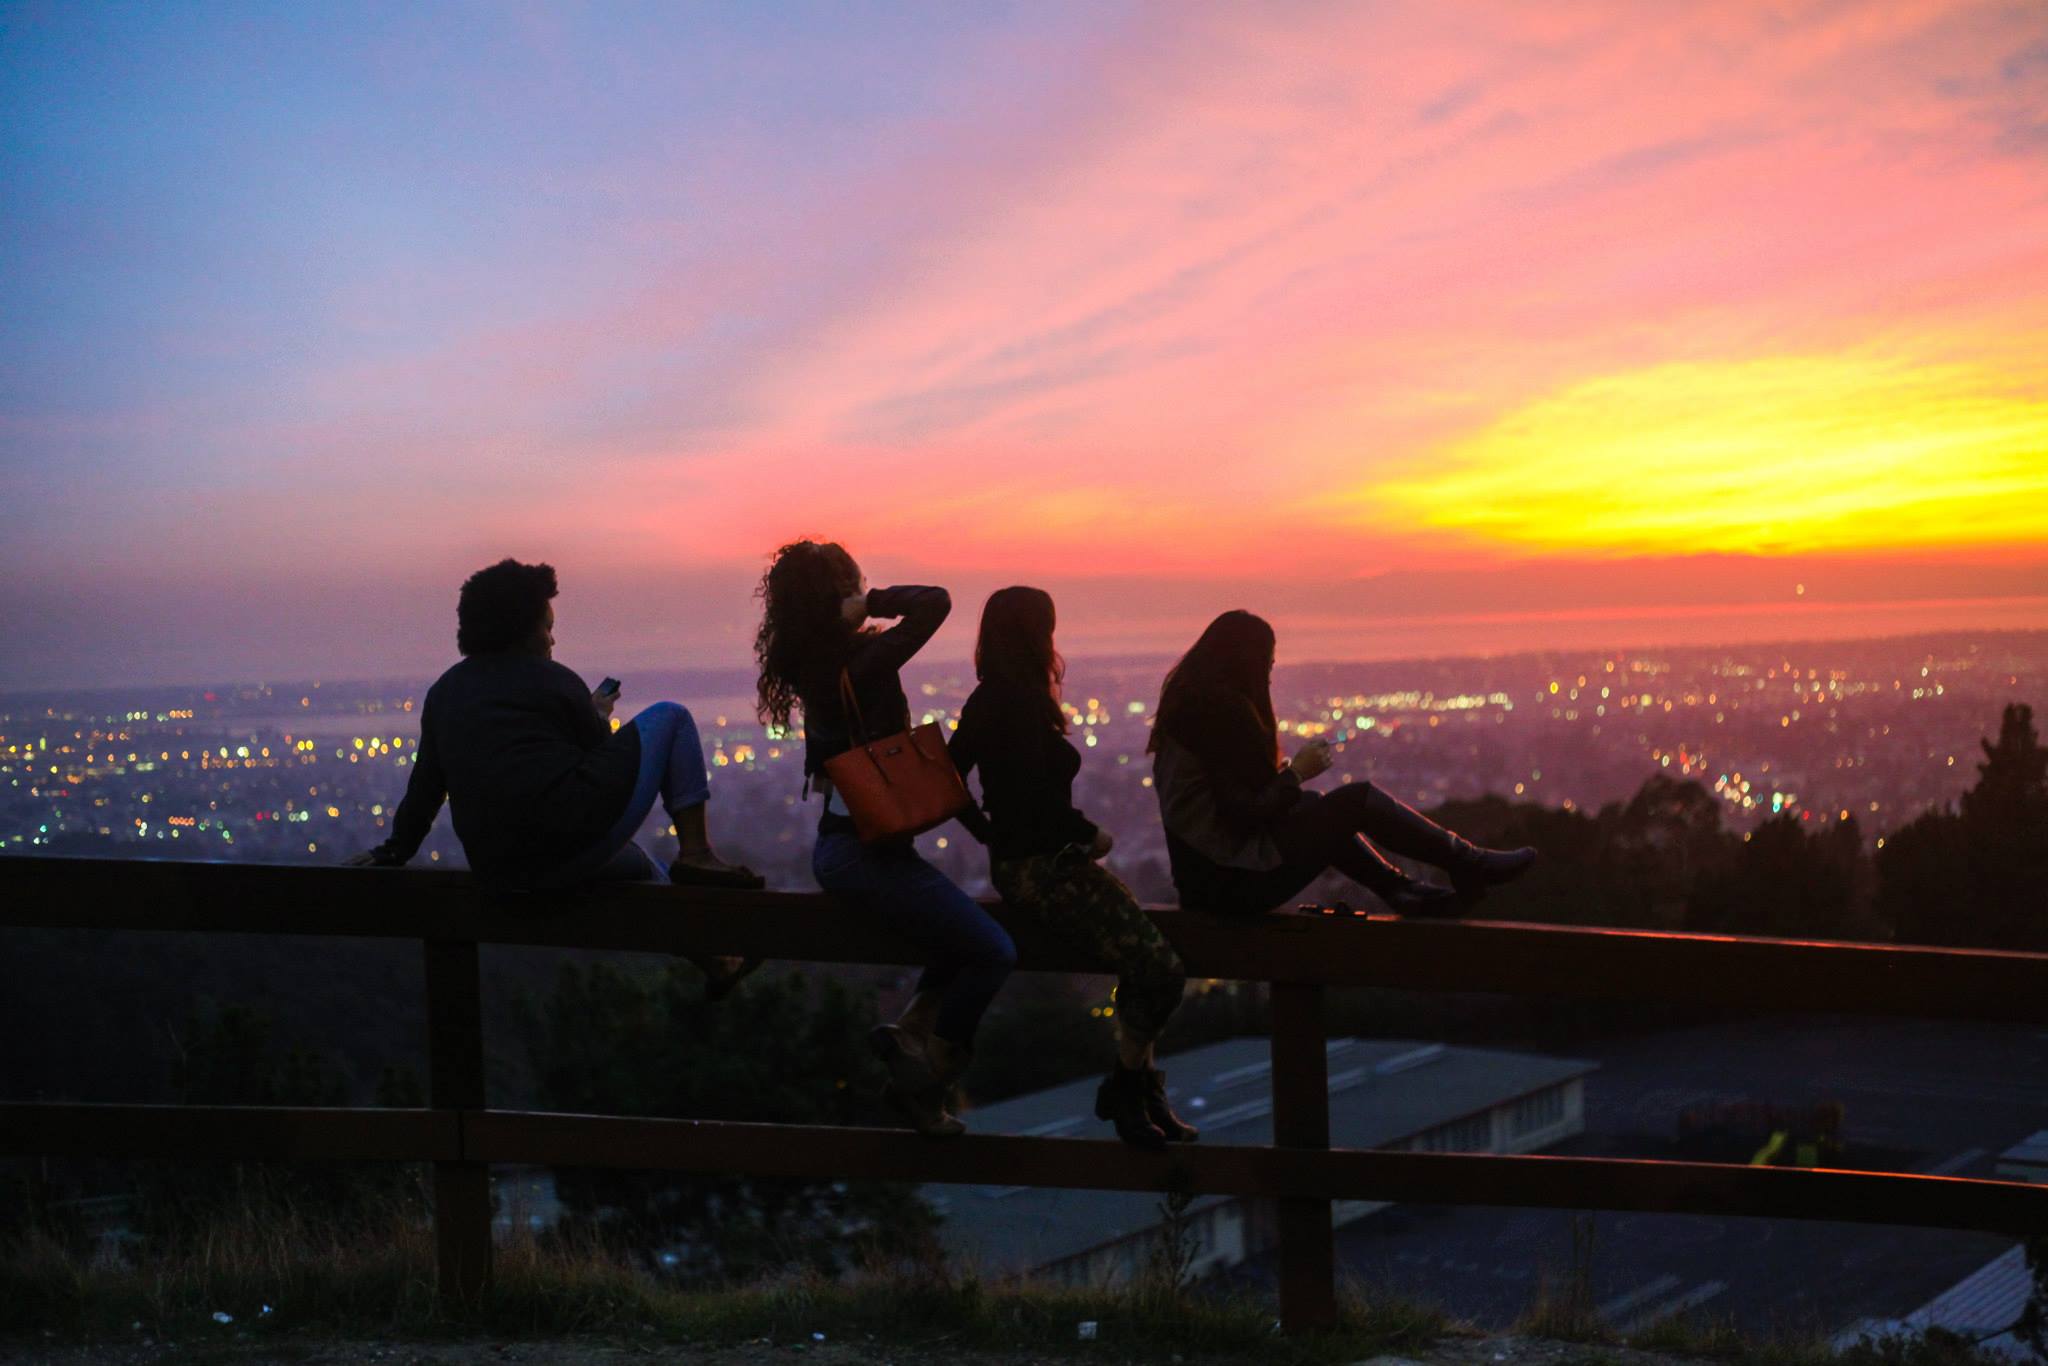 Four teenage girls sit on top of a wooden fence facing the sunset